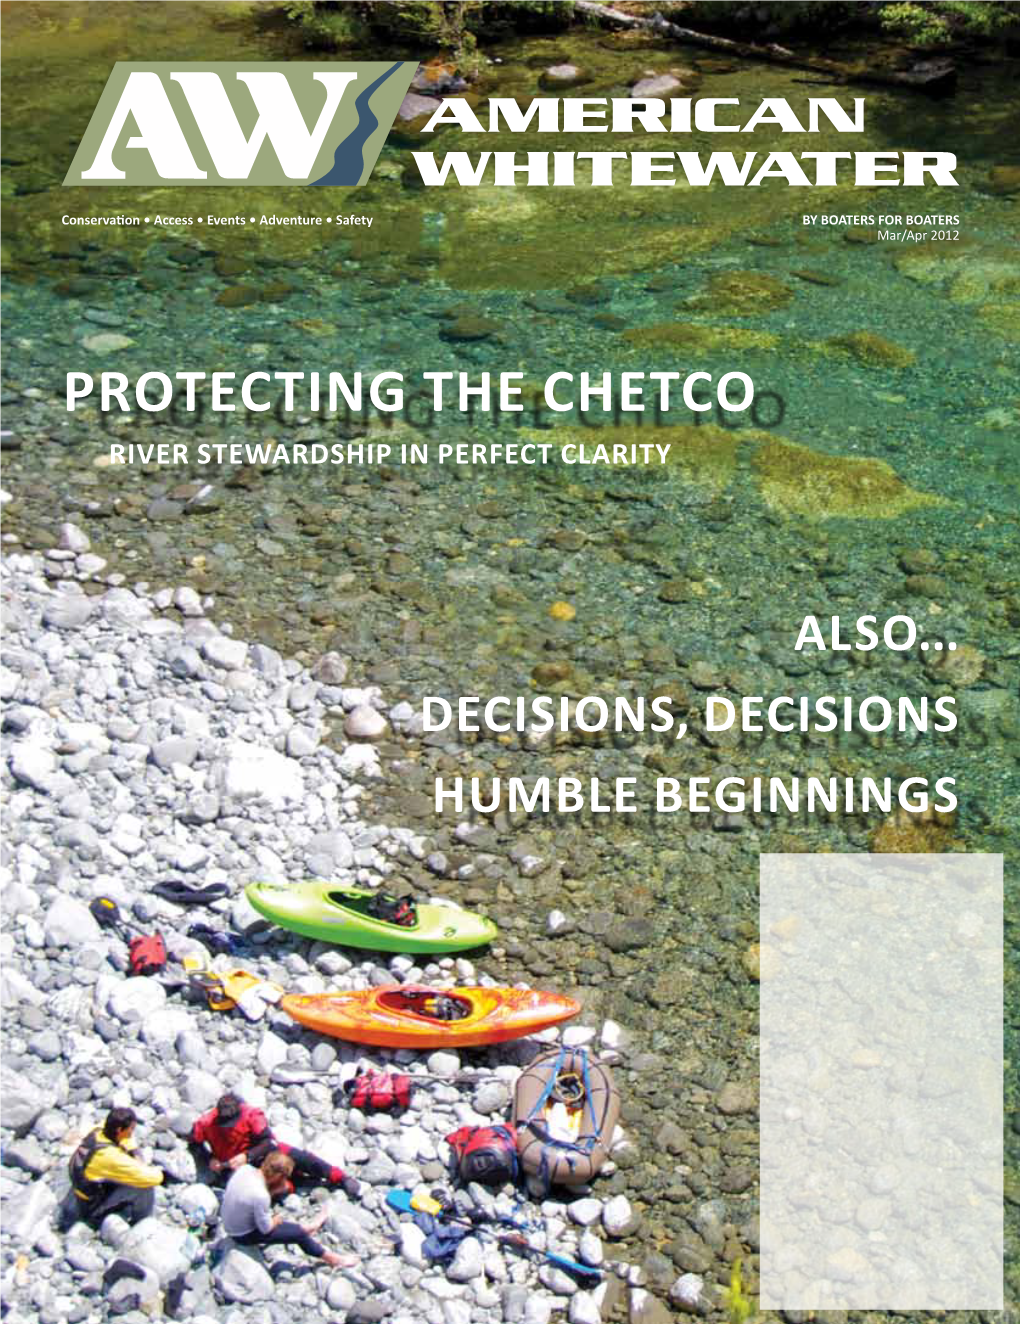 Protecting the Chetco River Stewardship in Perfect Clarity